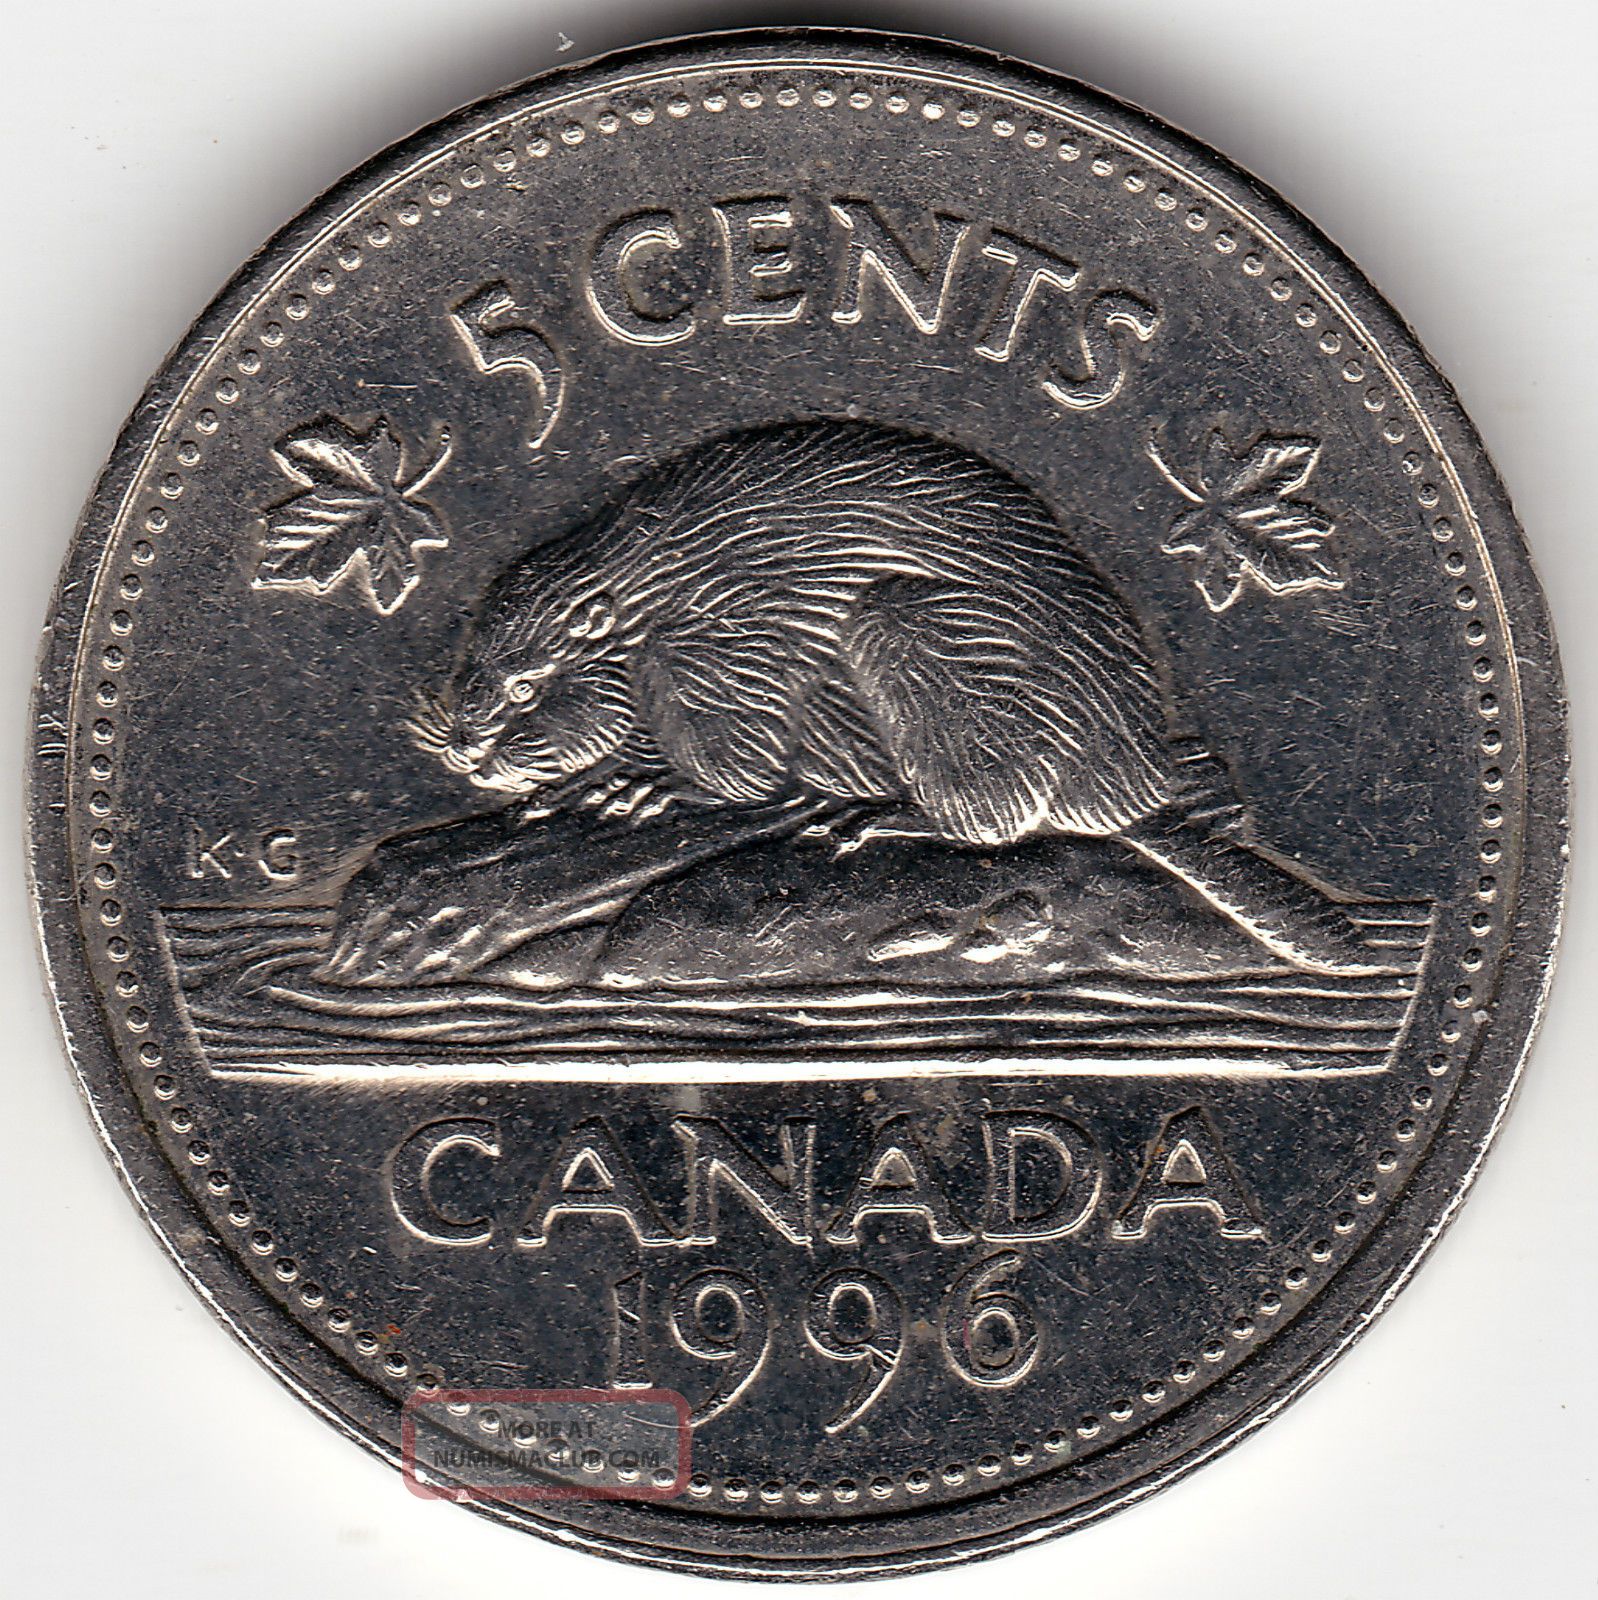 1996 Near 6 Canada 5c Coin - Doubling Of Ana In Canada